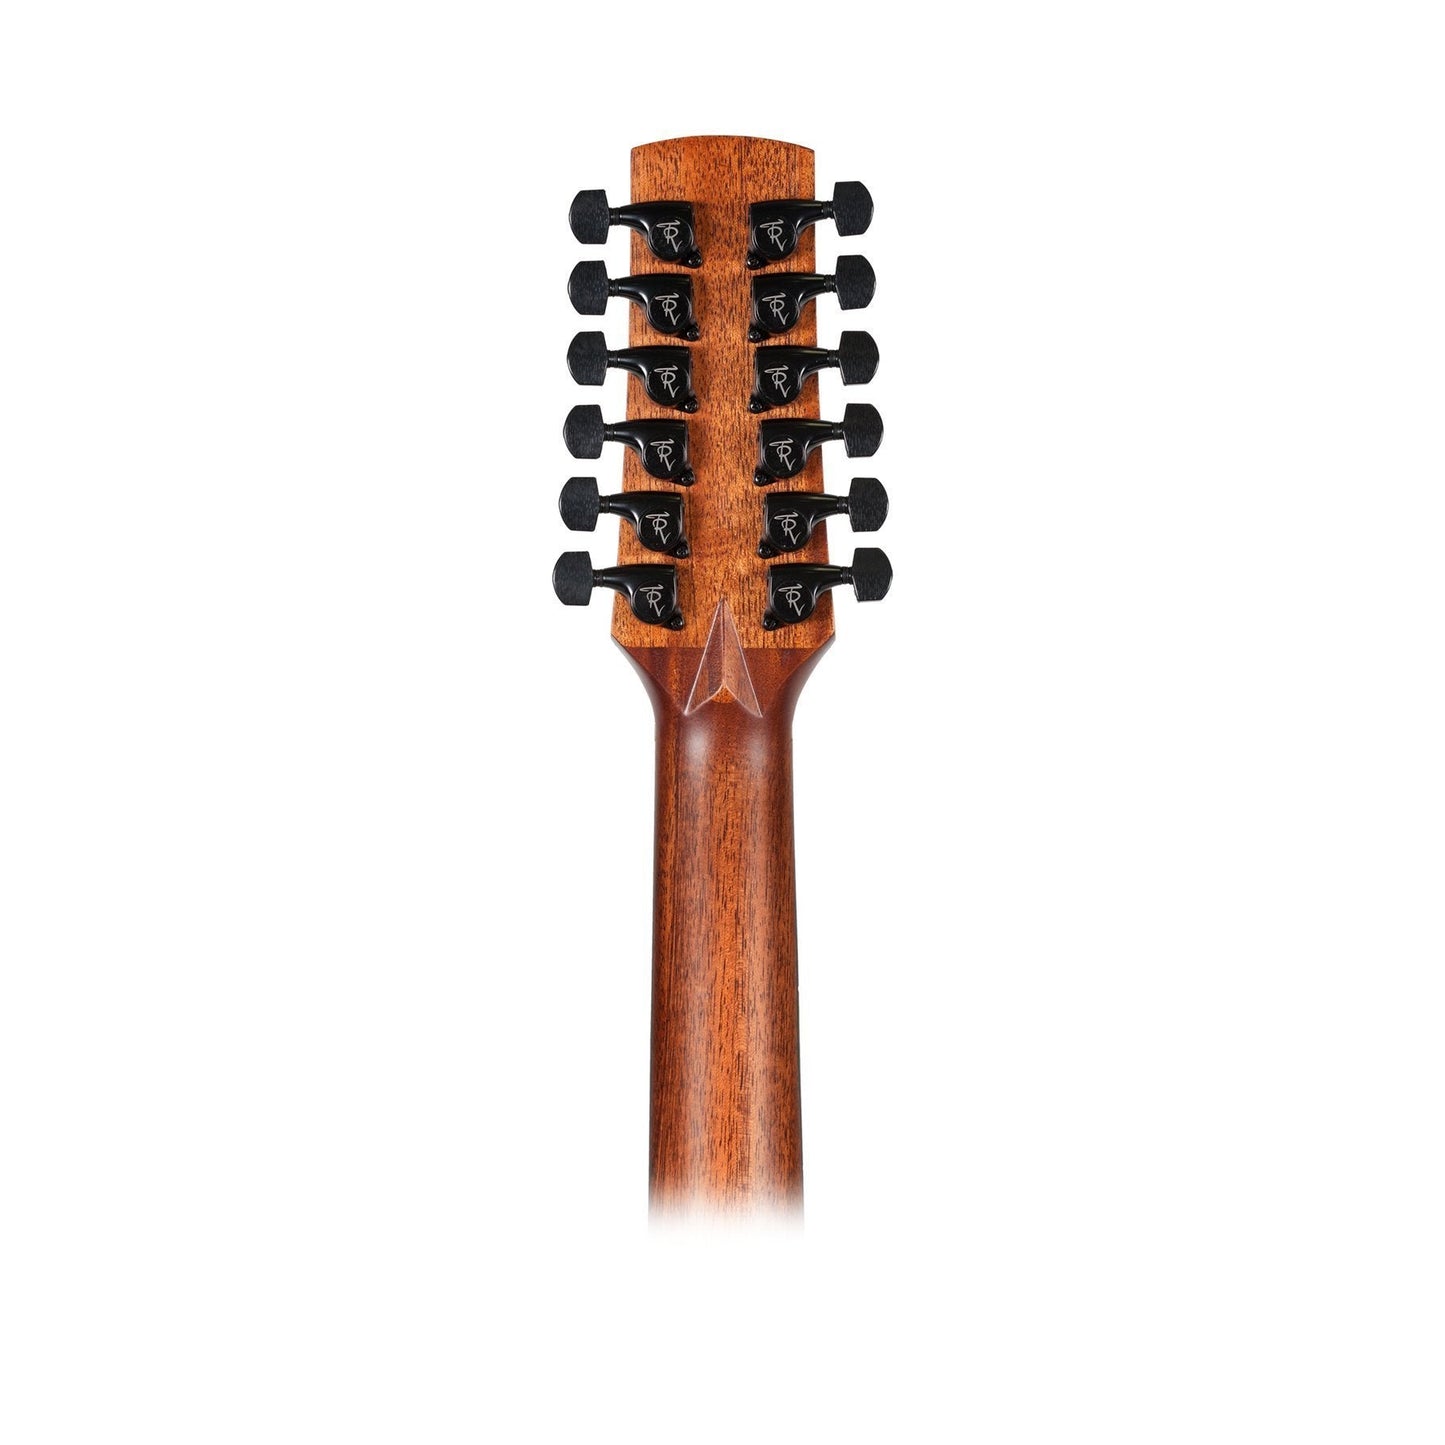 Load image into Gallery viewer, Timberidge &amp;#39;Messenger Series&amp;#39; 12-String Mahogany Solid Top Acoustic-Electric Dreadnought Cutaway Guitar with &amp;#39;Tree of Life&amp;#39; Inlay (Natural Satin)
